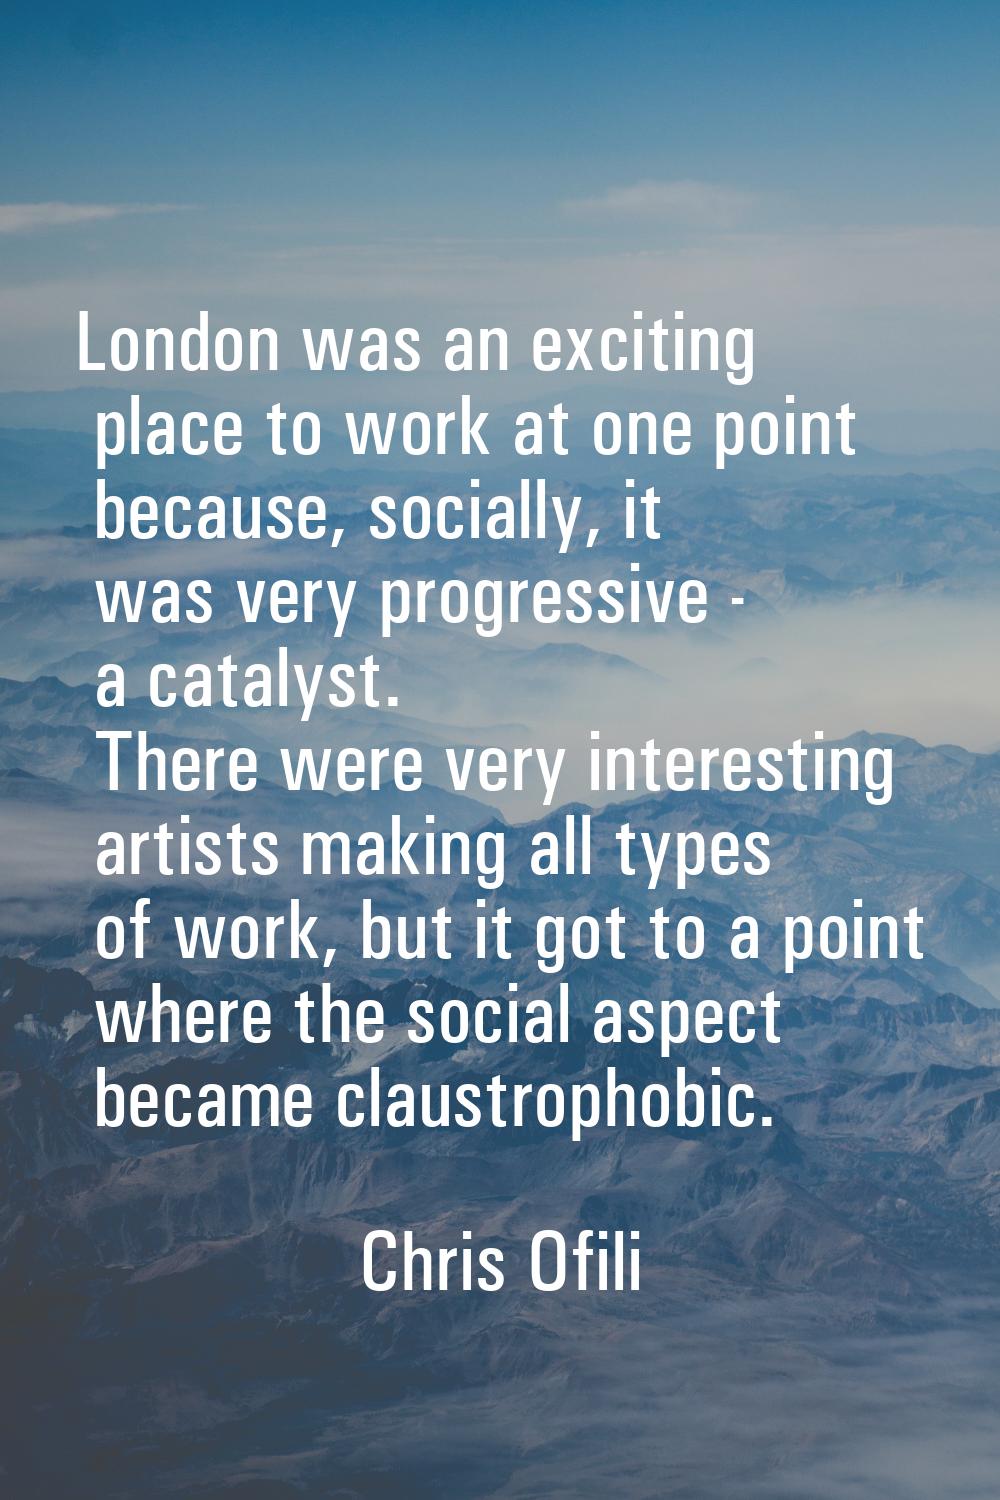 London was an exciting place to work at one point because, socially, it was very progressive - a ca